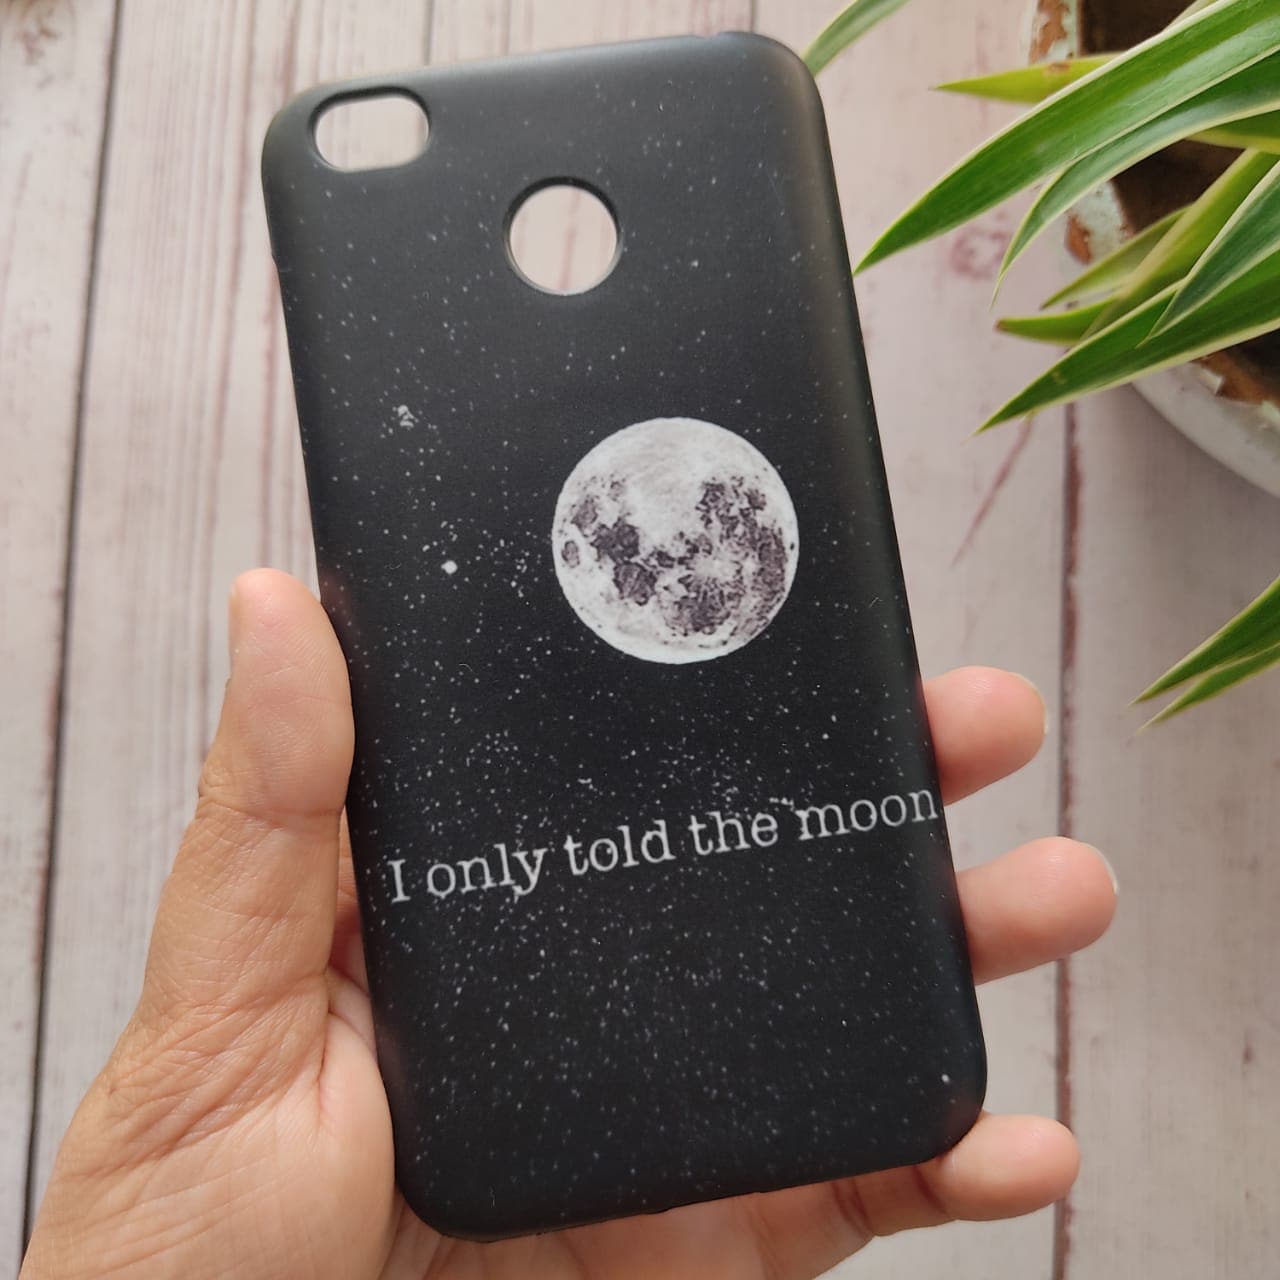 REDMI 4X Only told the moon Case C-033